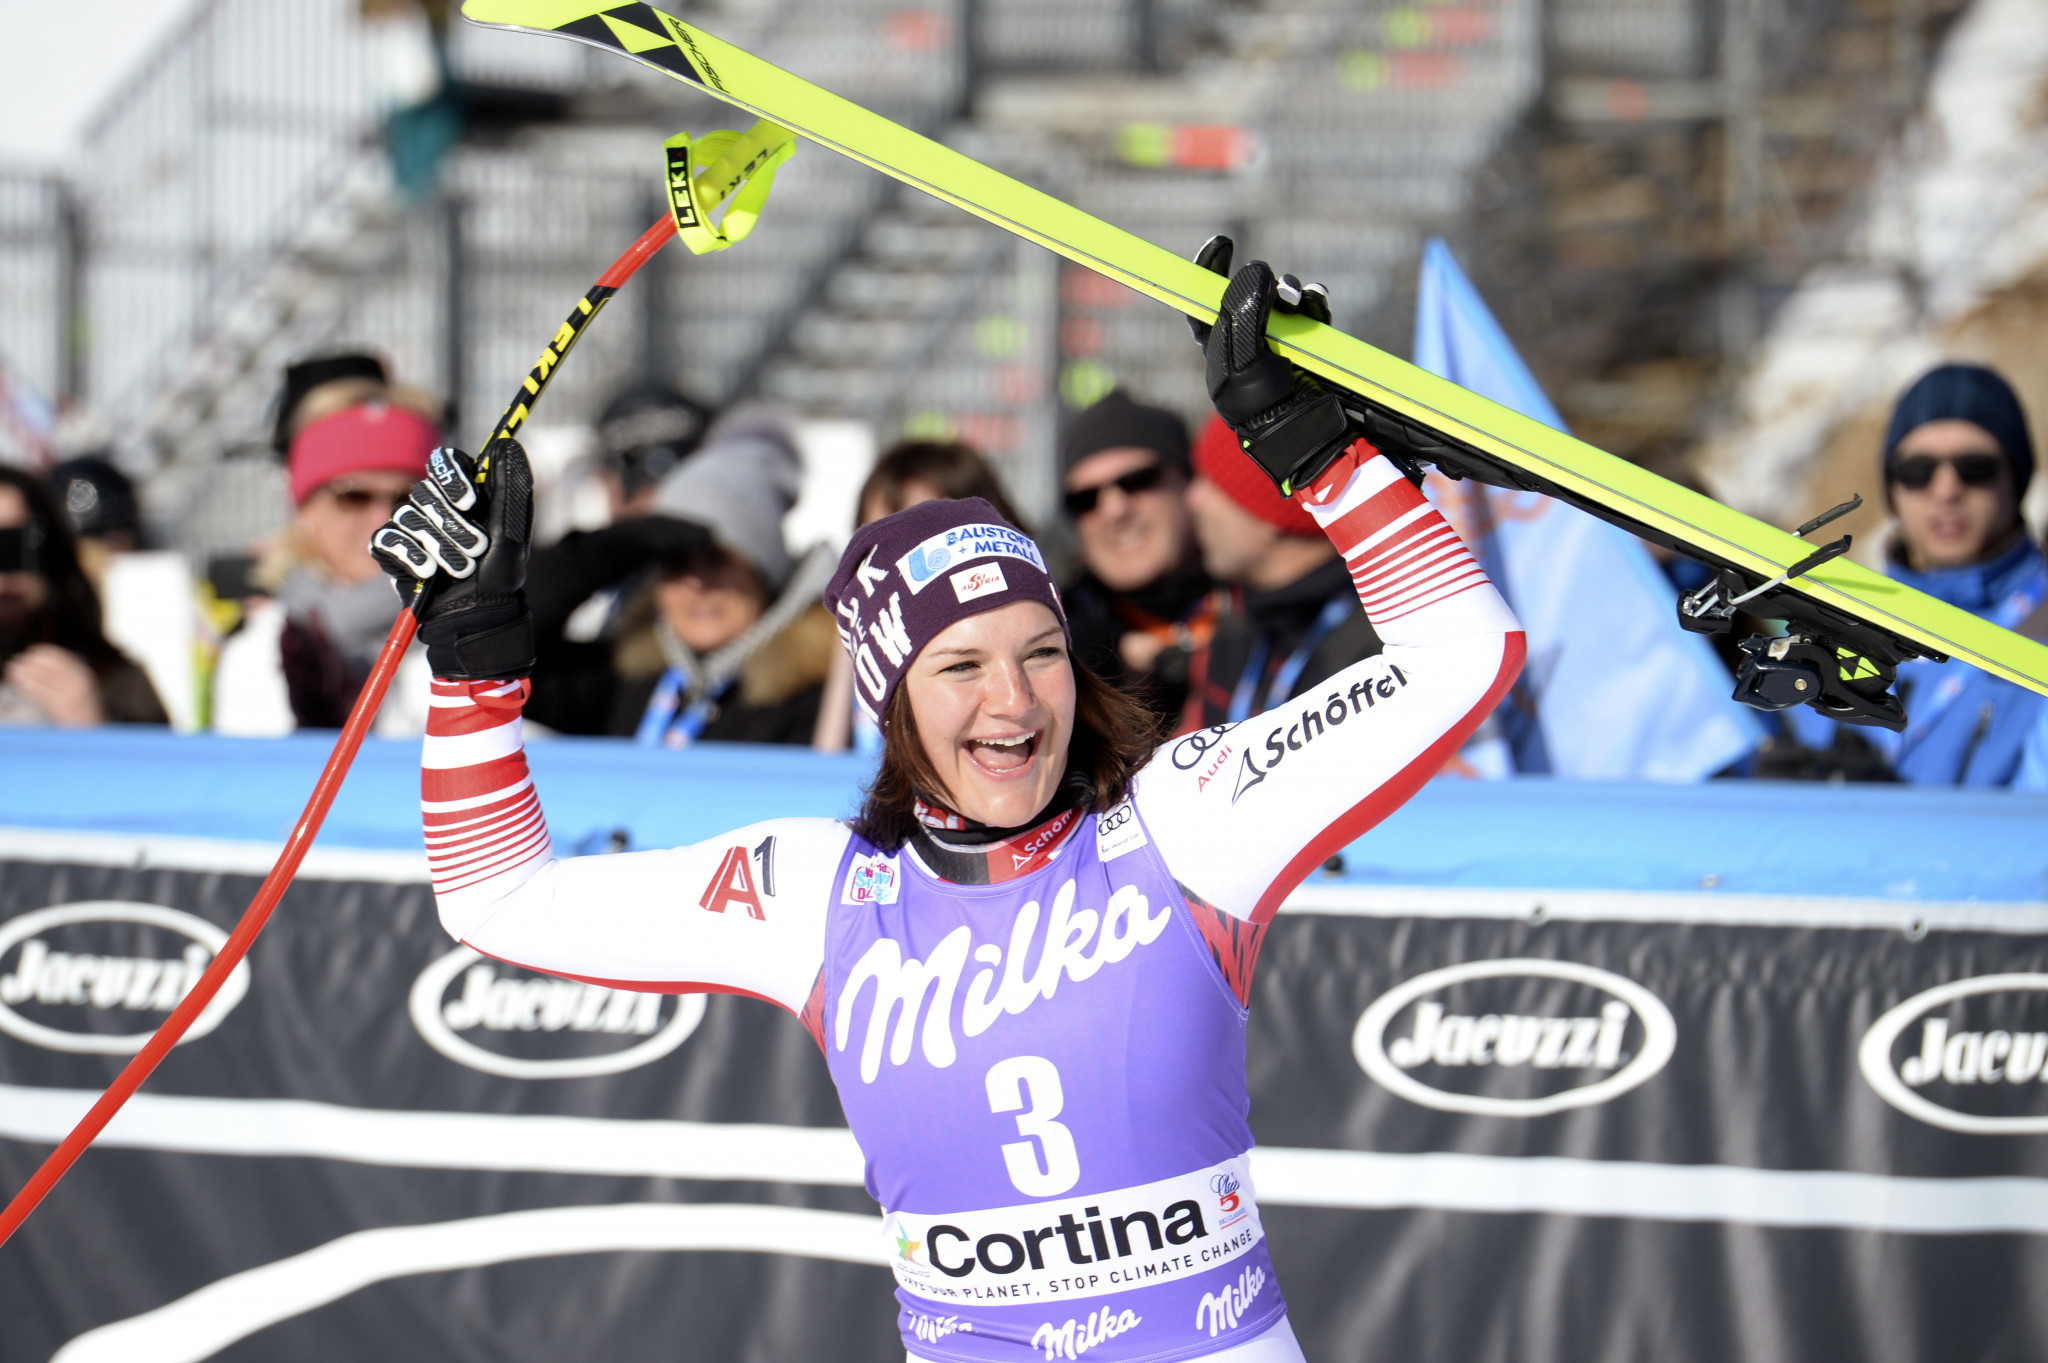 Siebenhofer earns back-to-back downhill victories at women's Alpine Skiing World Cup